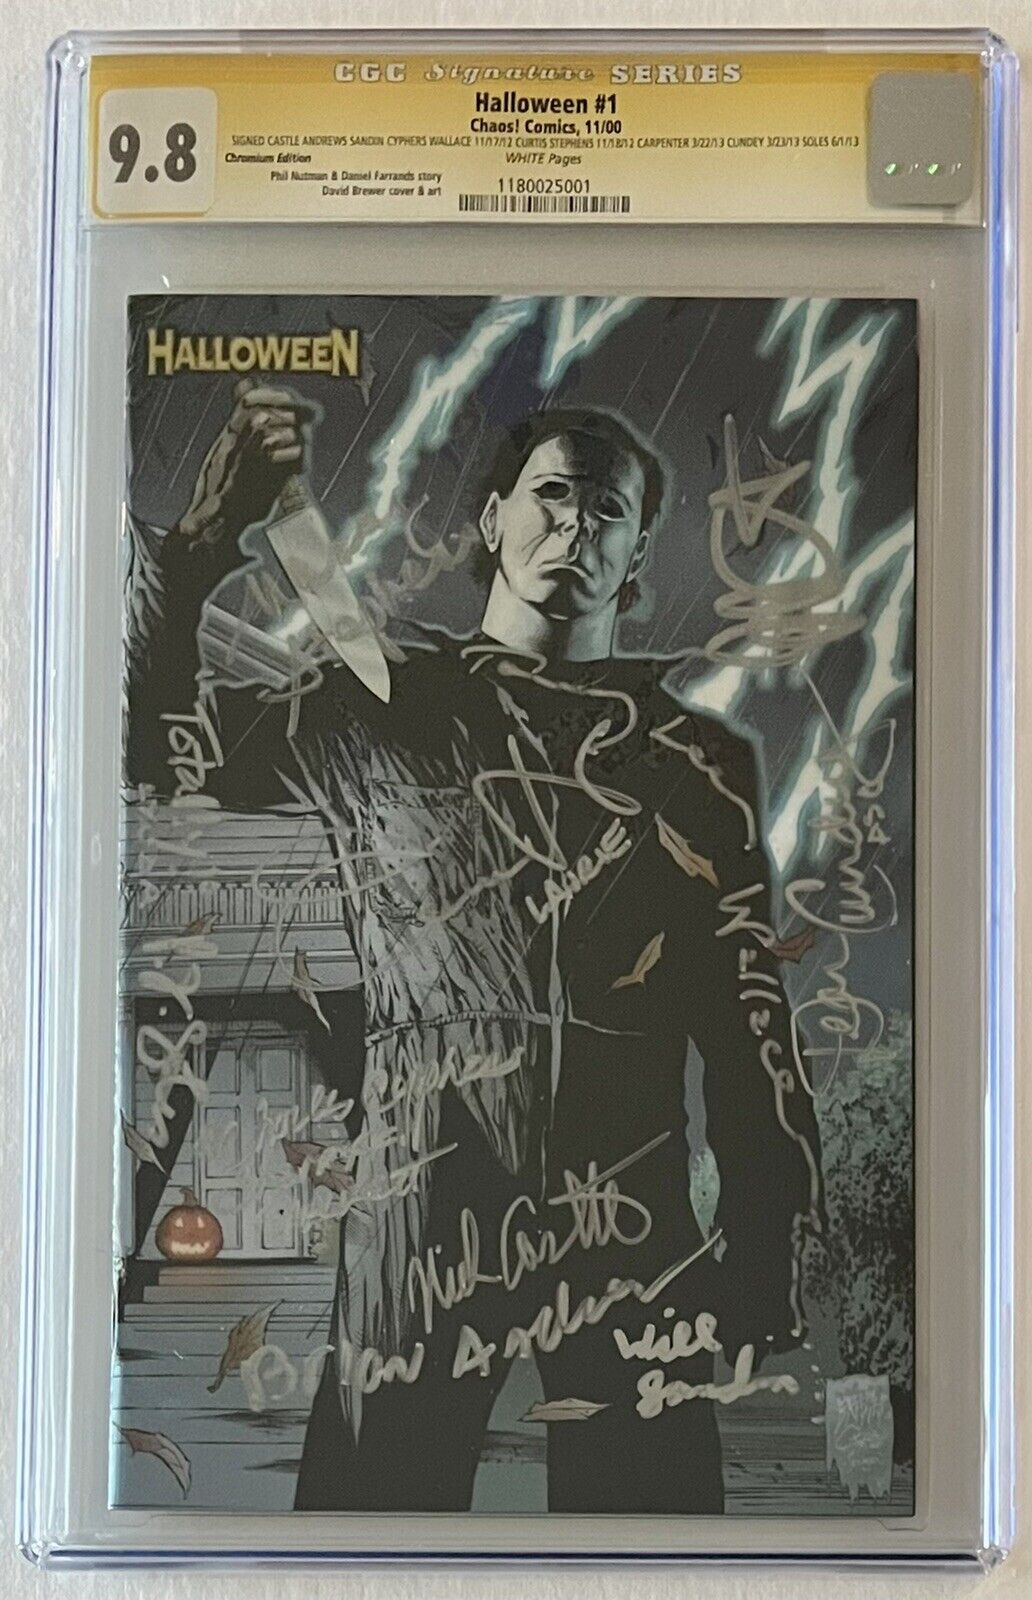 HALLOWEEN #1 • CGC SS 9.8 • SIGNED BY 10 • SIGNED BY JAMIE LEE CURTIS • CHROMIUM